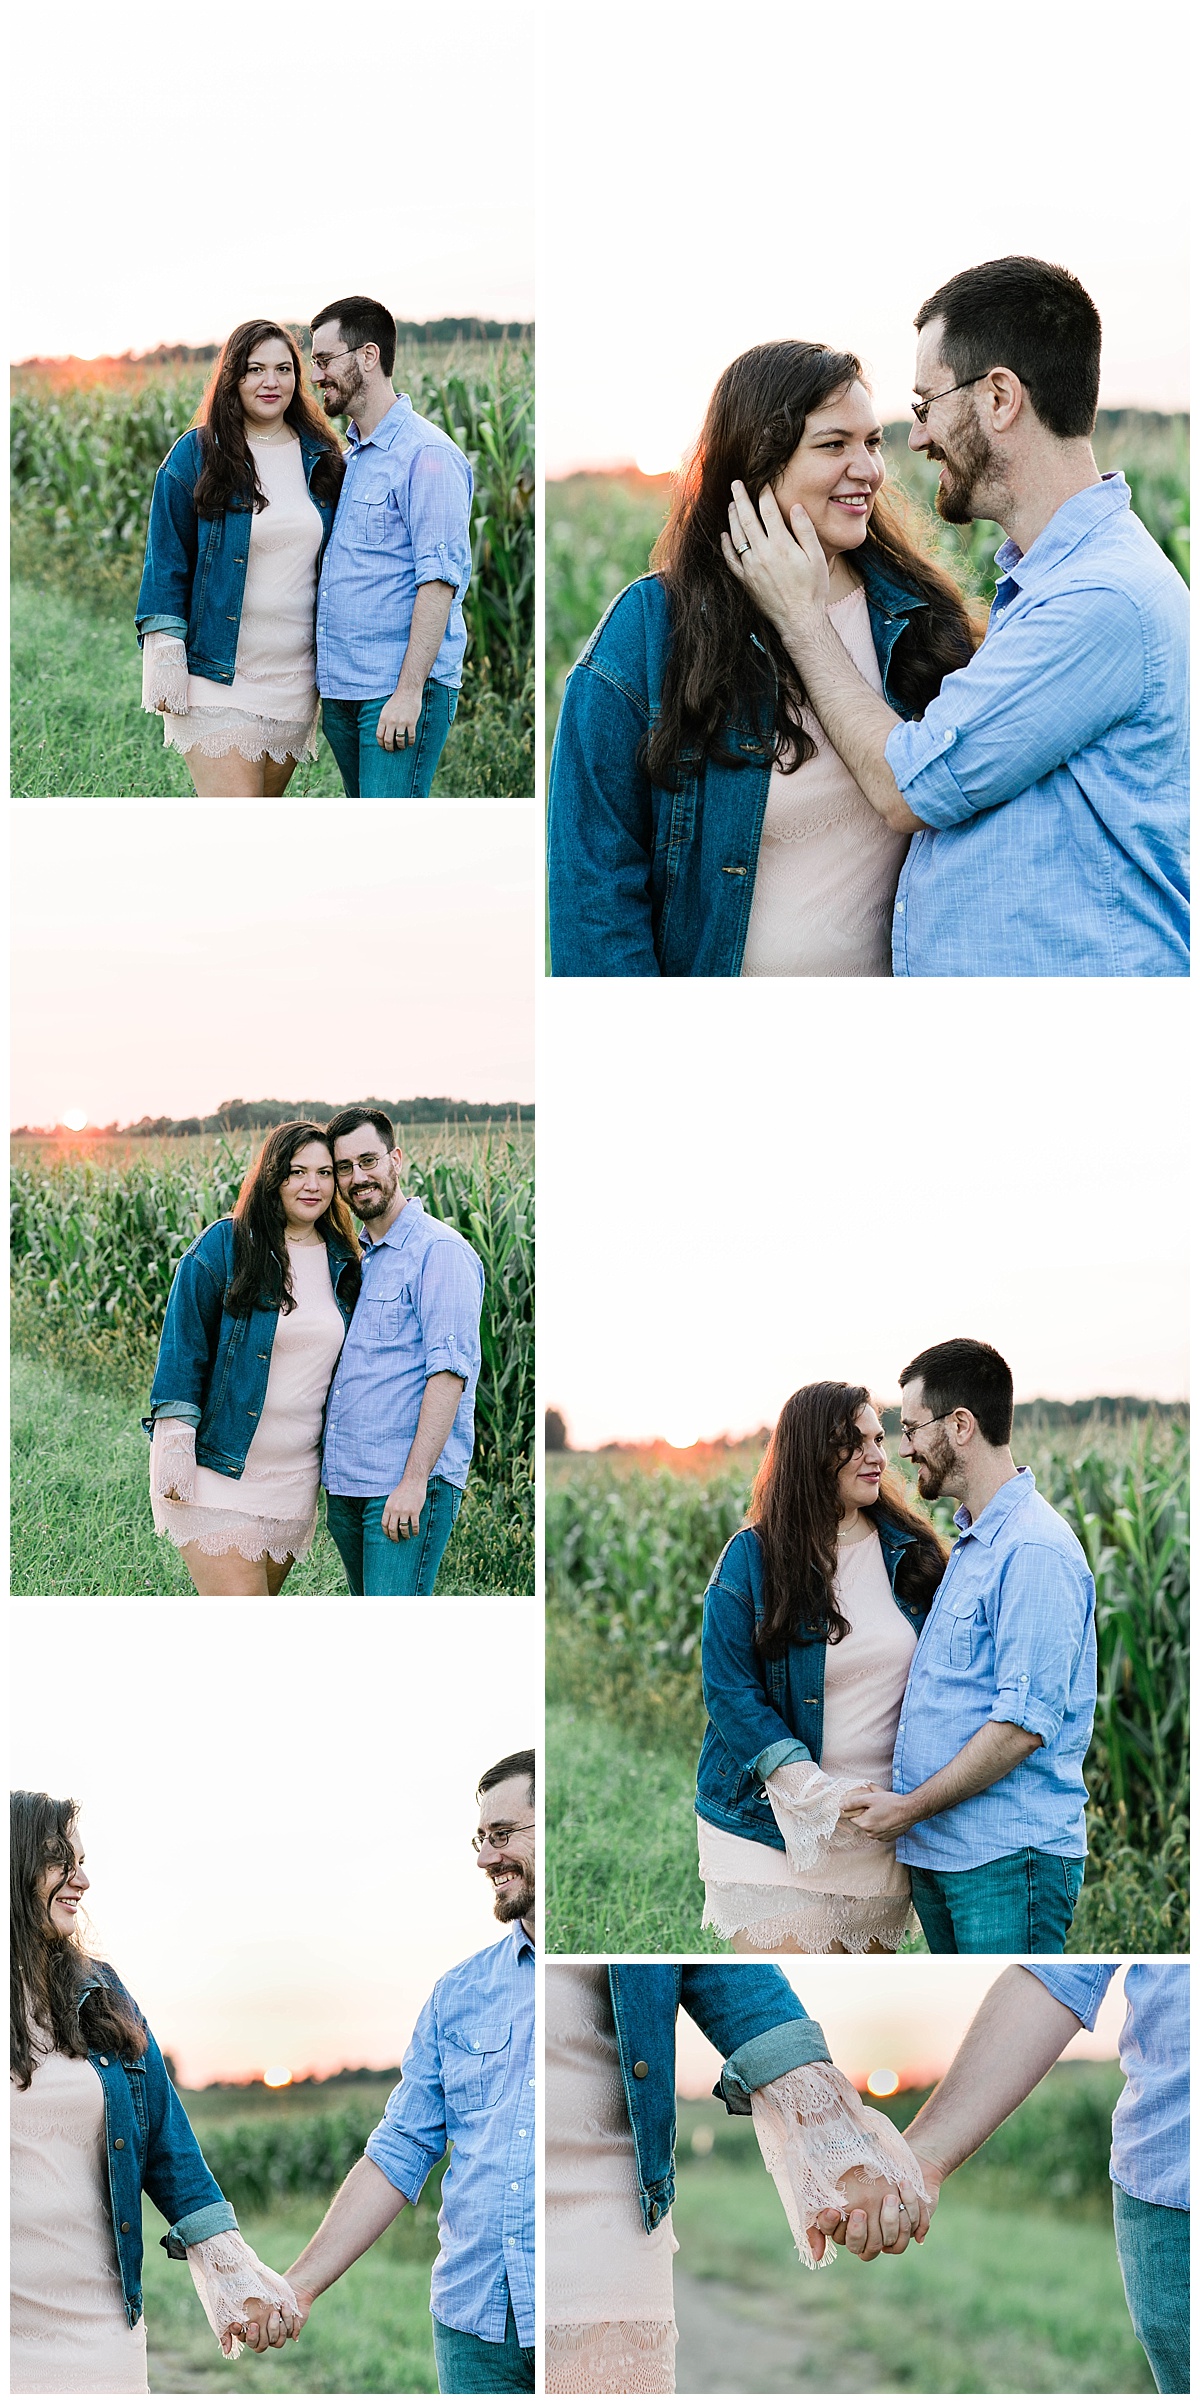 Amanda and Justin - Letchworth state Park engagement photos - Lass and Beau-9070.jpg